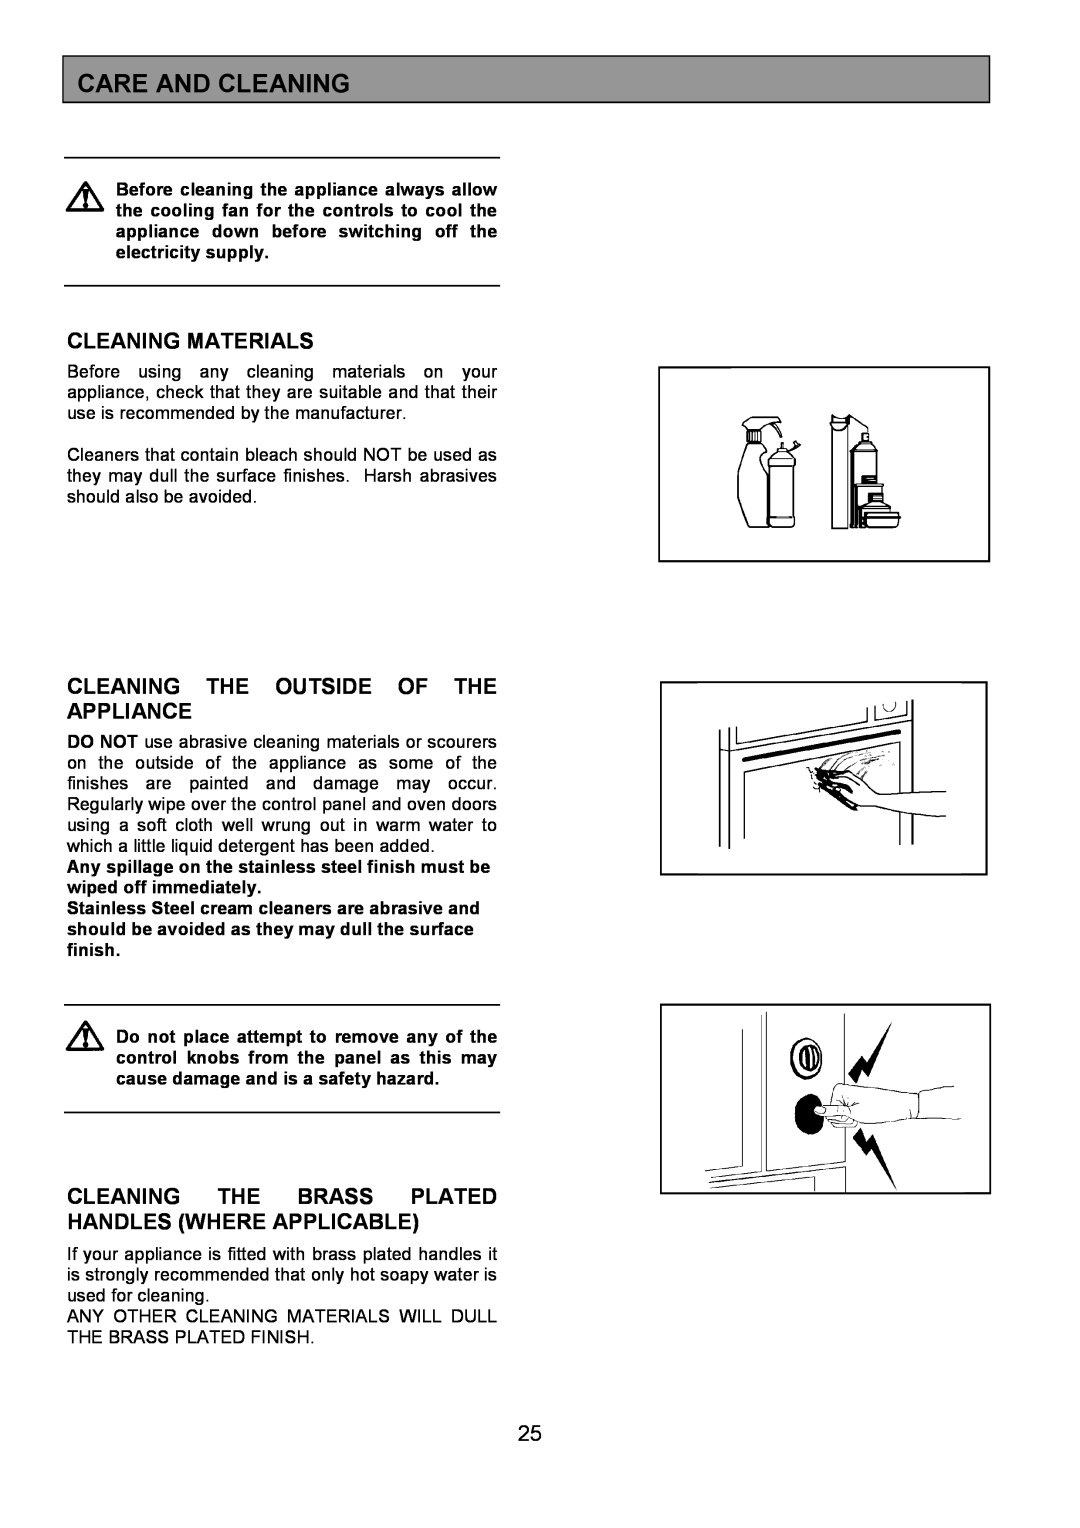 AEG 3210 BU installation instructions Care And Cleaning, Cleaning Materials, Cleaning The Outside Of The Appliance 